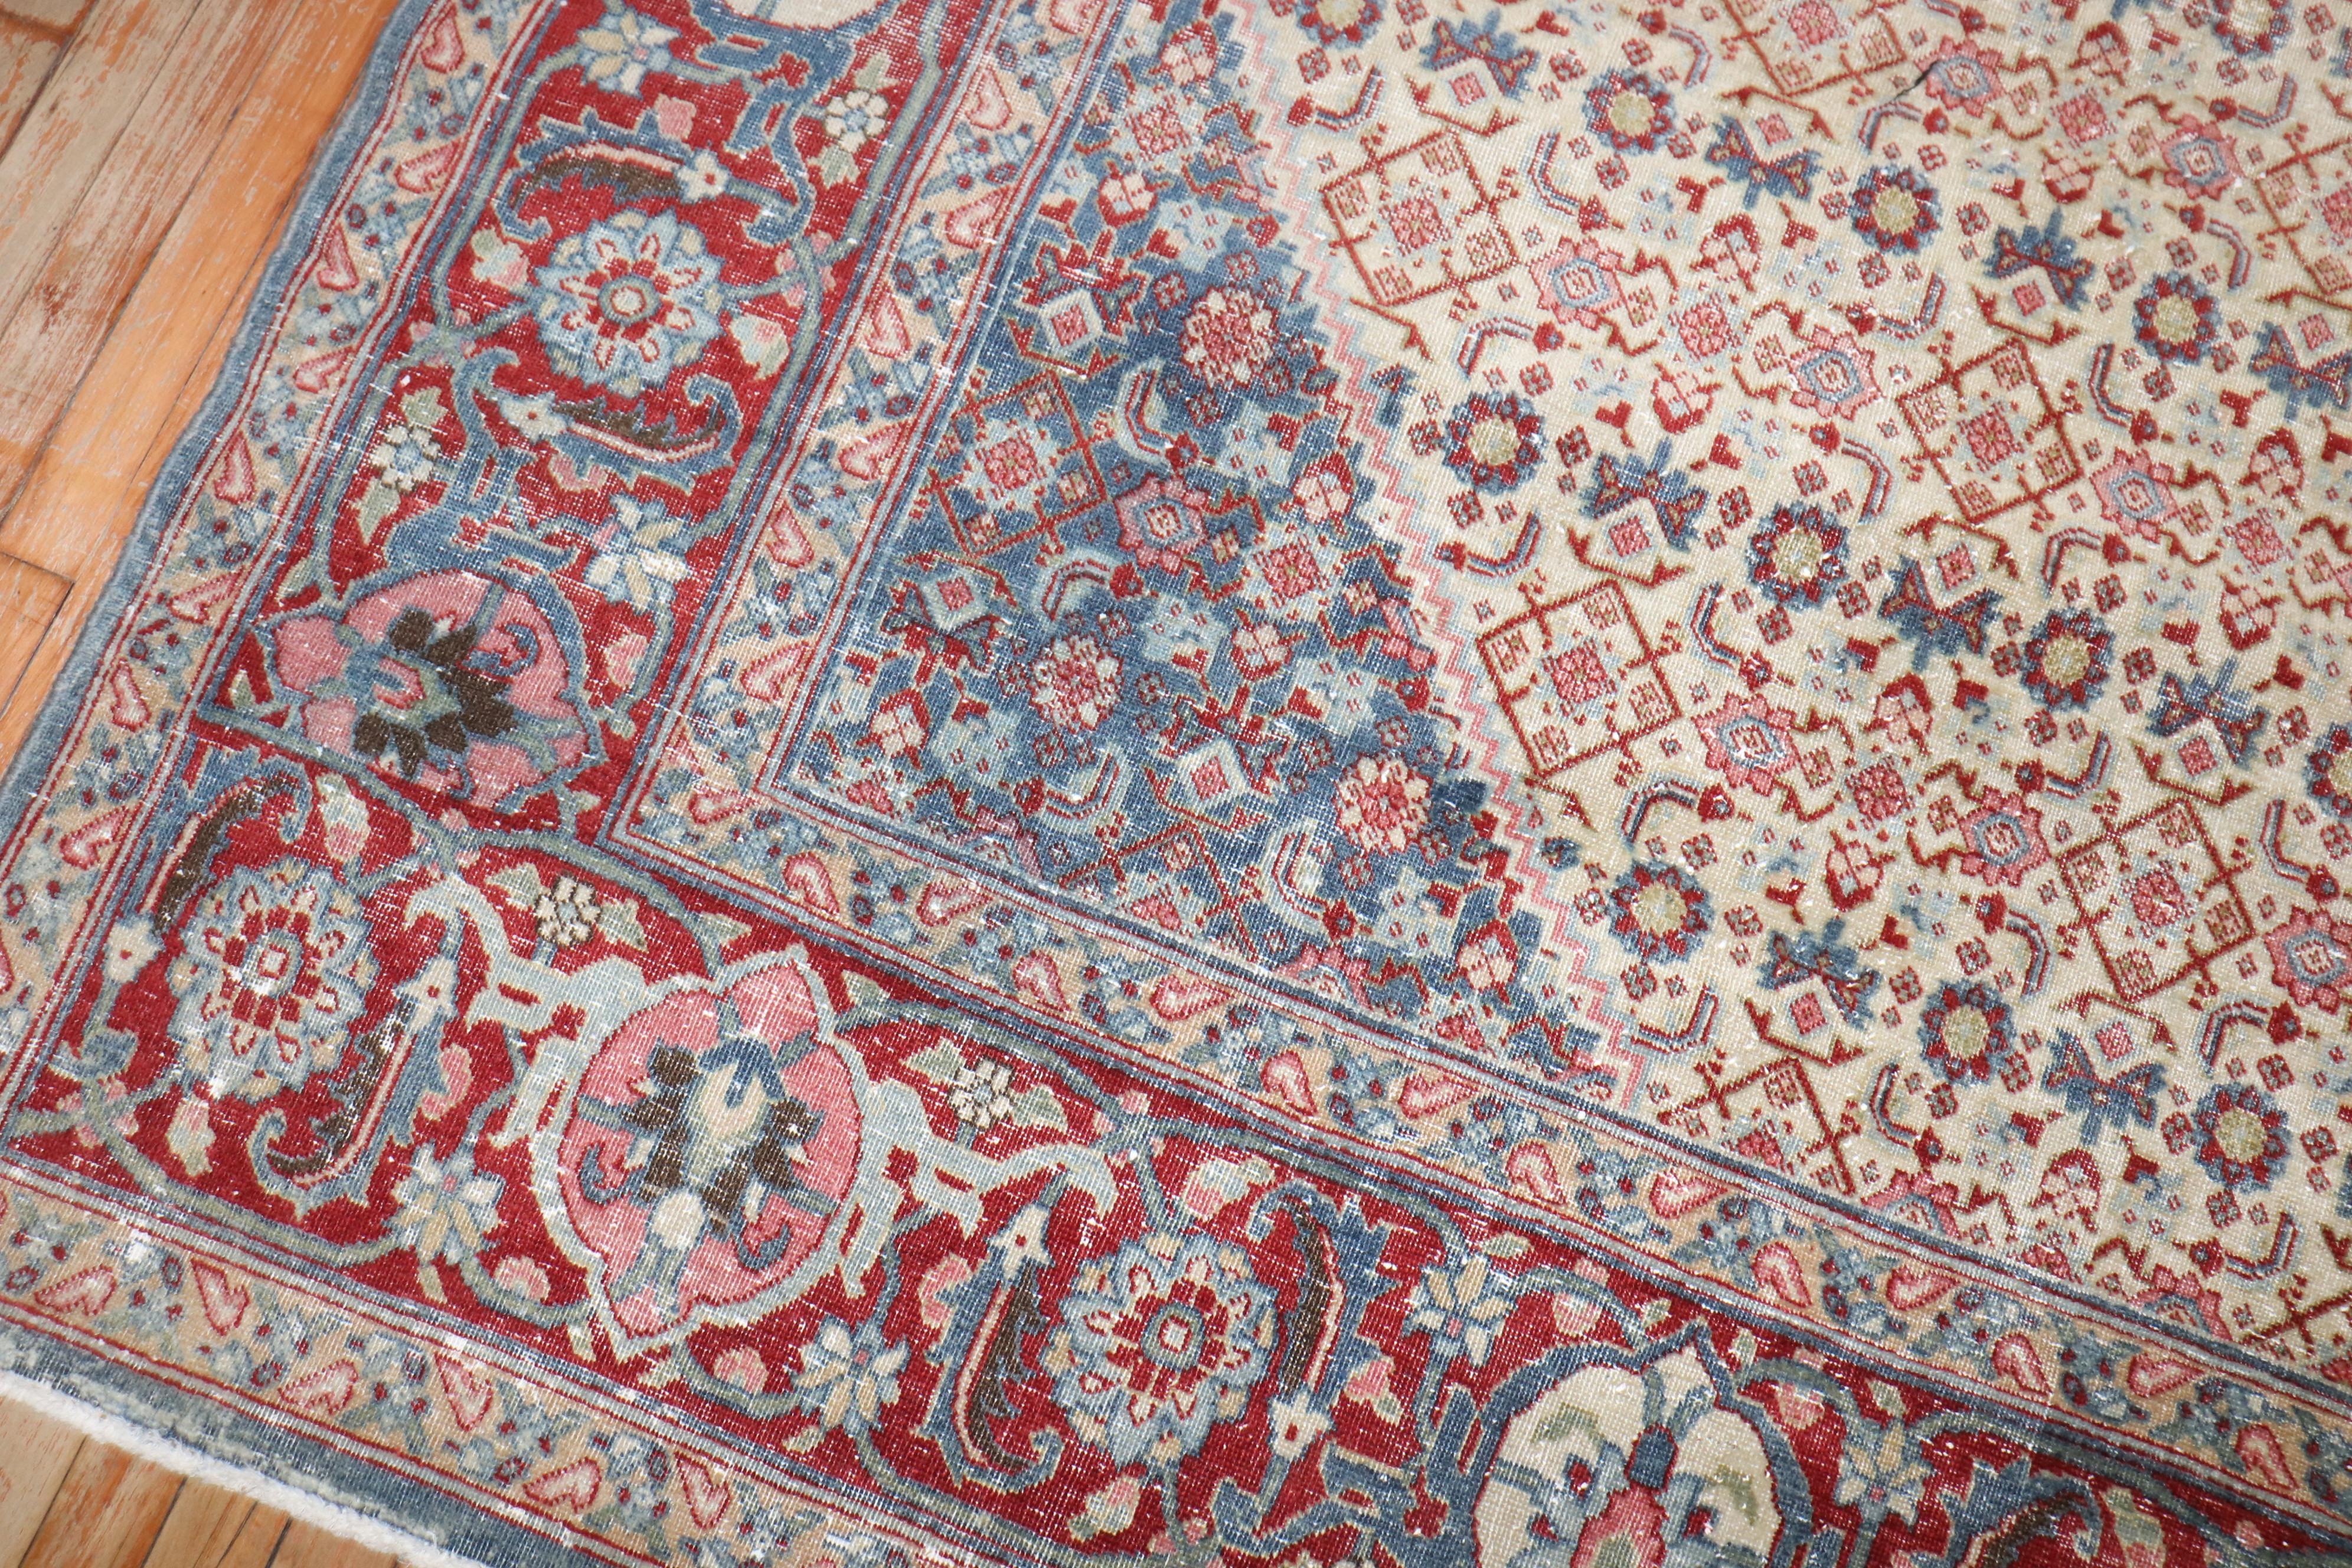 An early 20th century Room size Persian Tabriz worn rug with a small light blue central medallion on a herati design wheat ground.

Measures: 9'6'' x 13'6''.